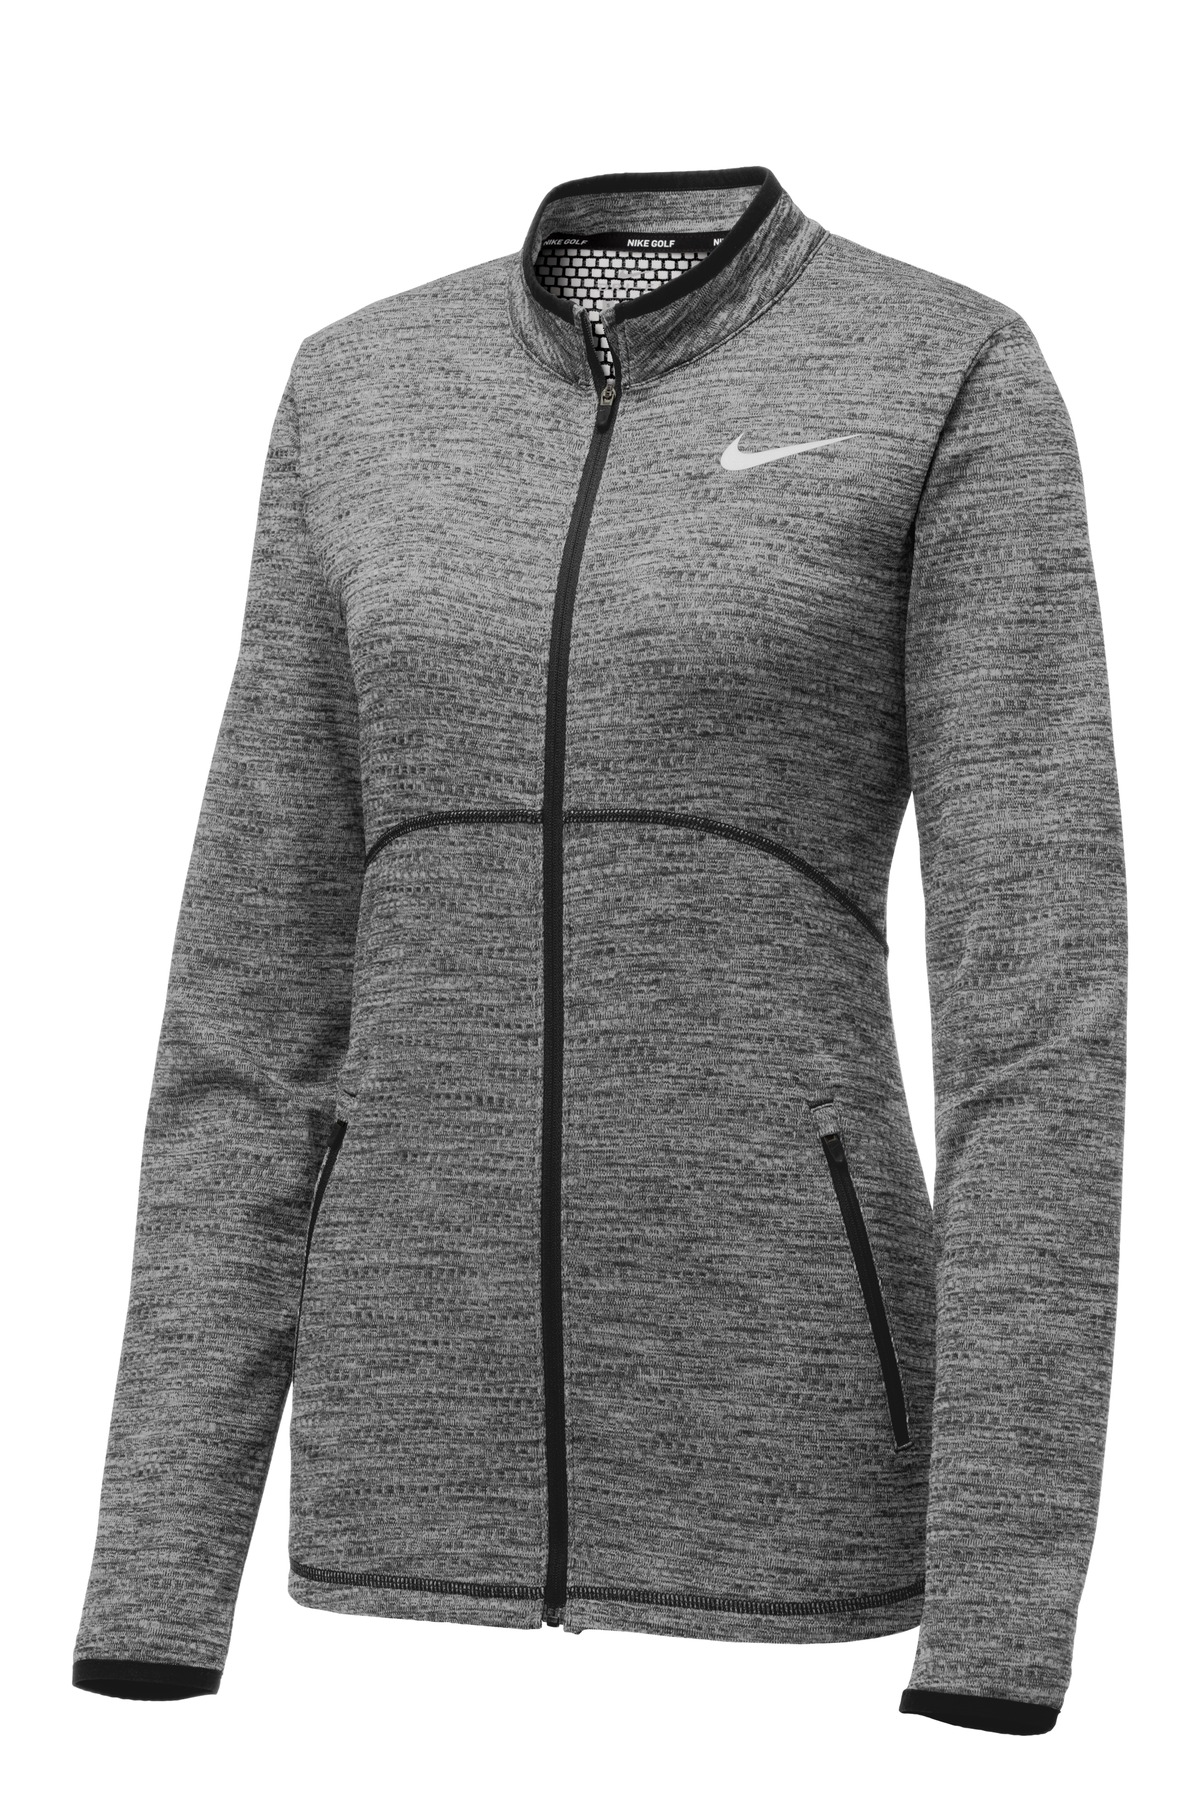 DISCONTINUED Limited Edition Nike Ladies Full-Zip Cover-Up-Nike